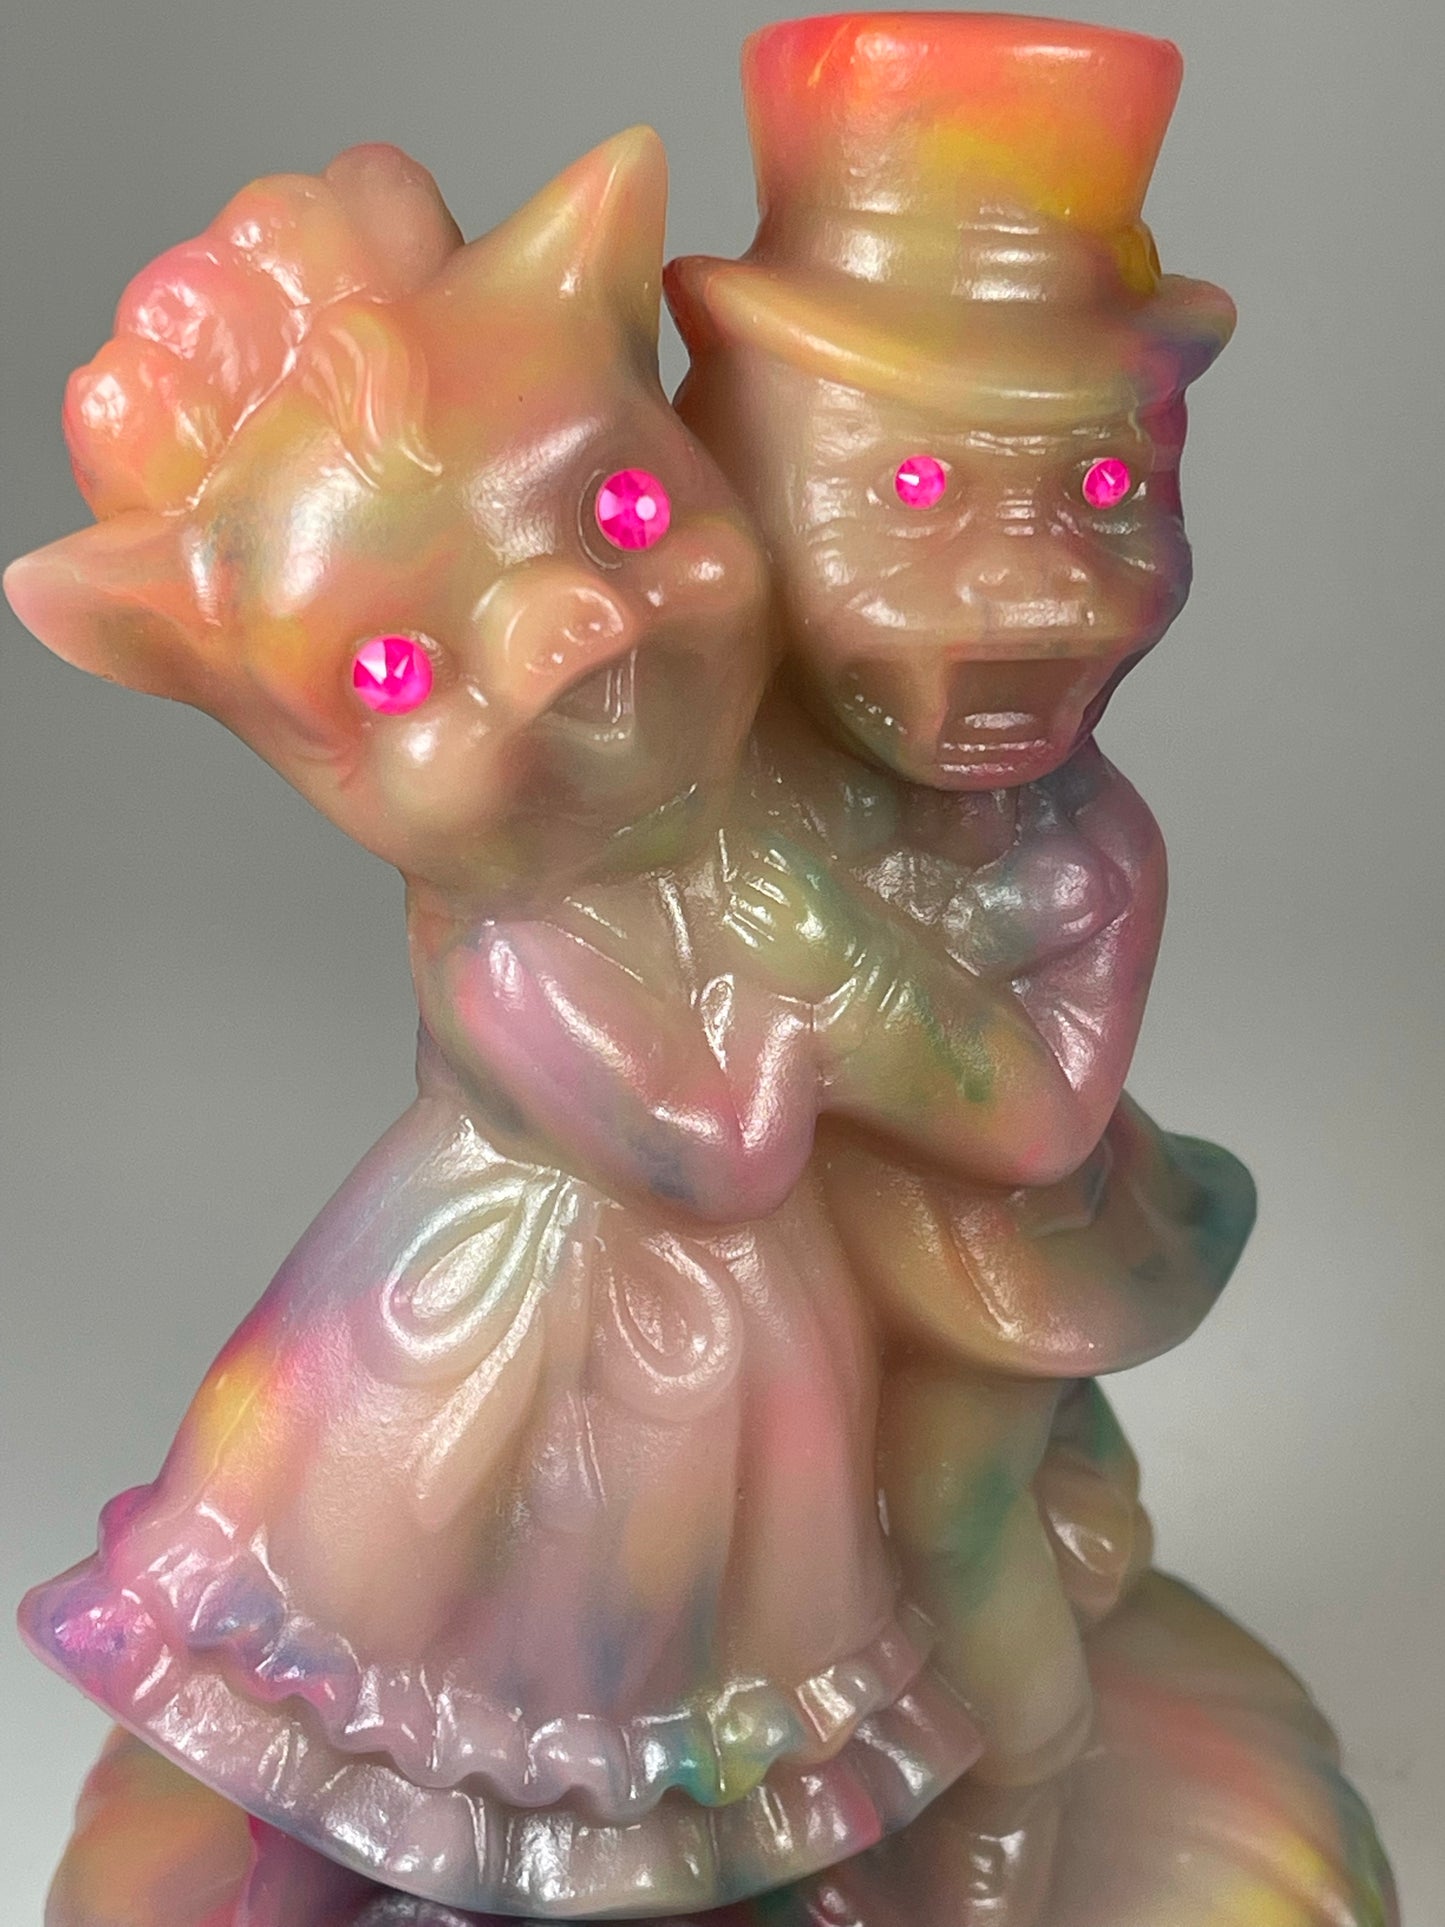 The Wedding of Piggy and Ape: Neon Marbled Glow (Custom request)